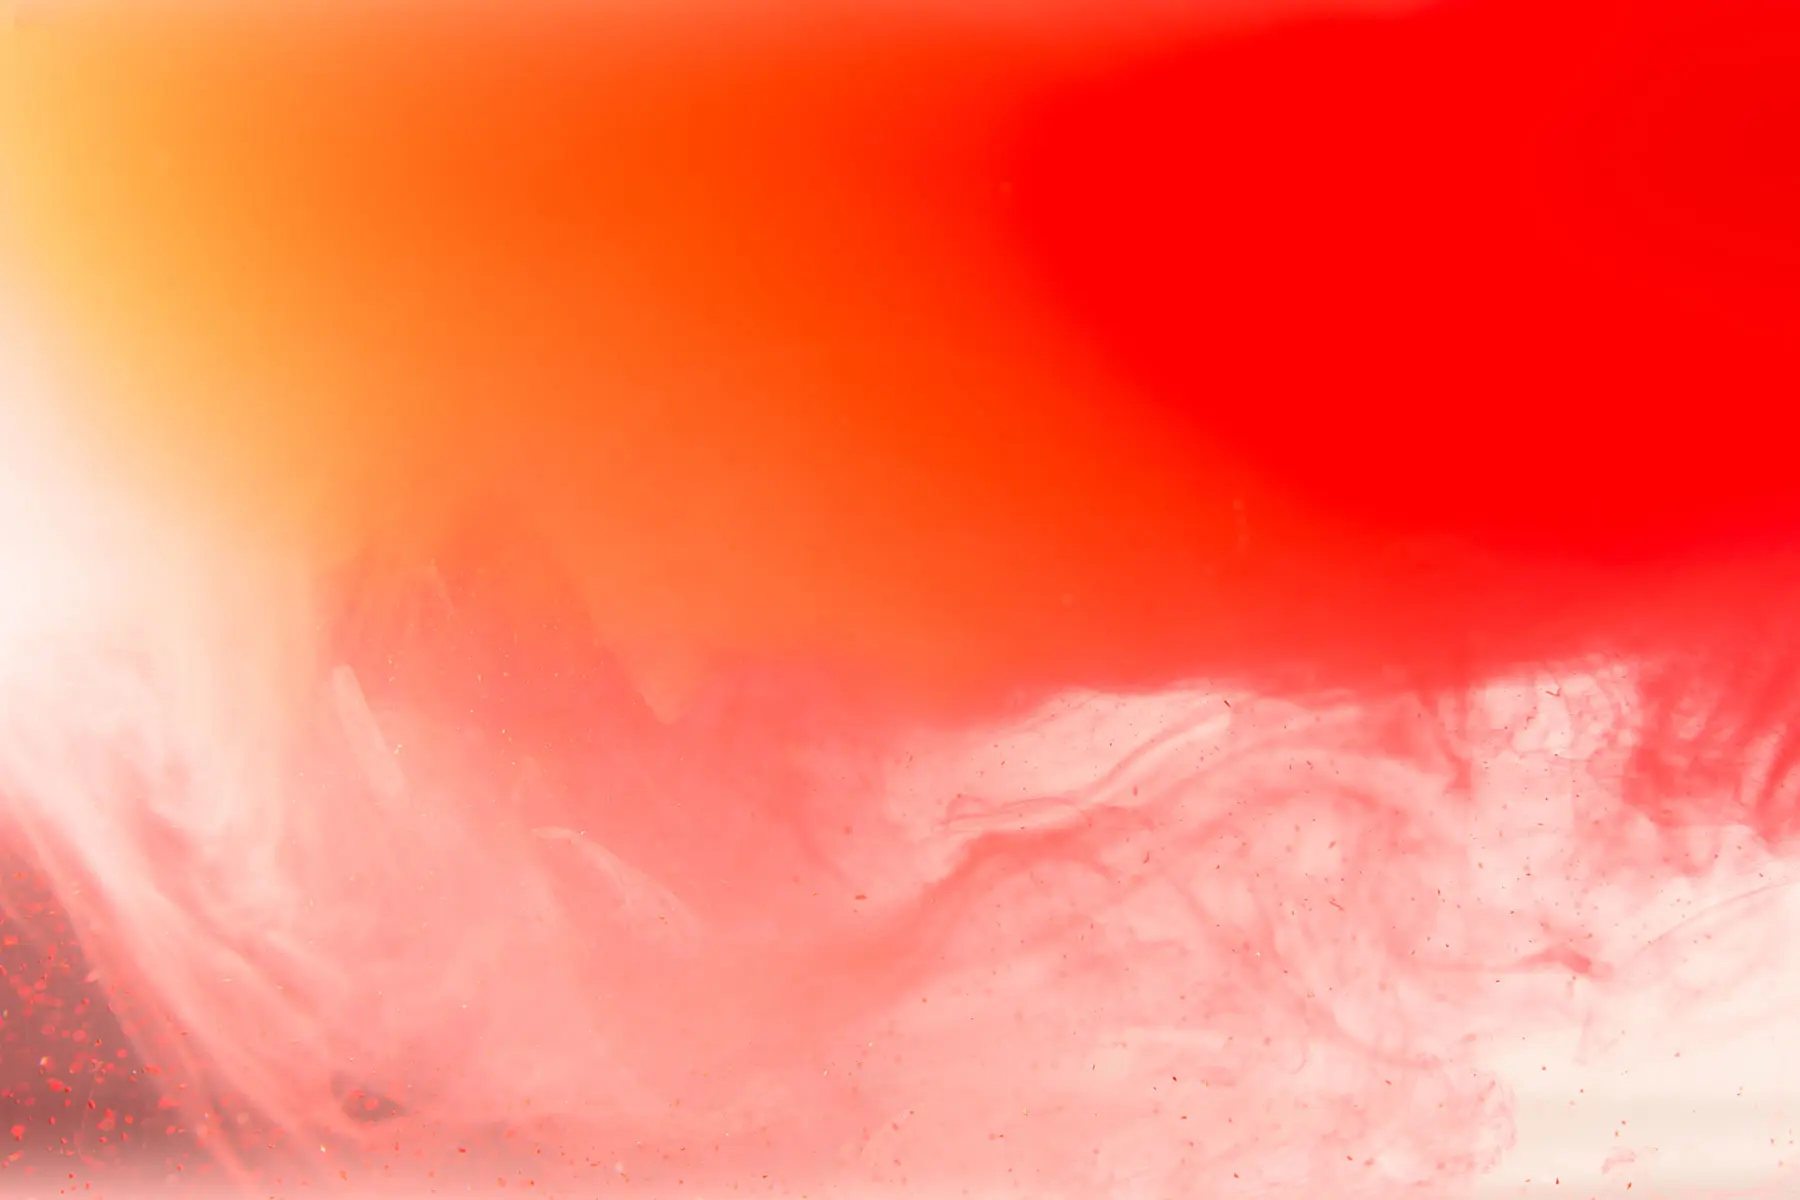 Abstract orange and red liquid to represent hot flash sensation. AW577